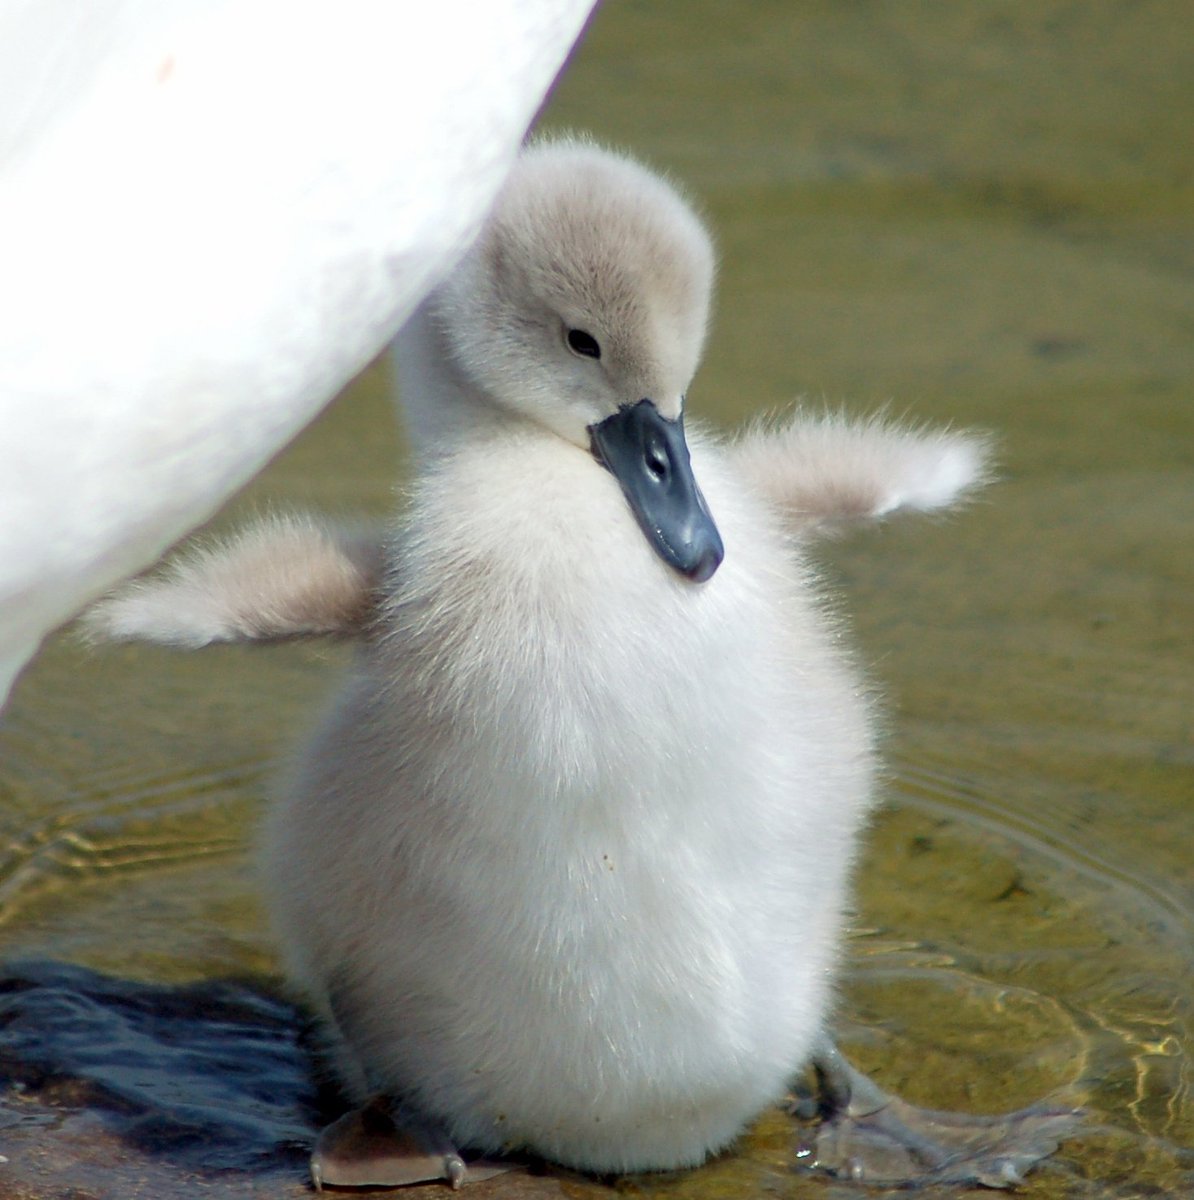 'Look mummy, my wings are huge!' 